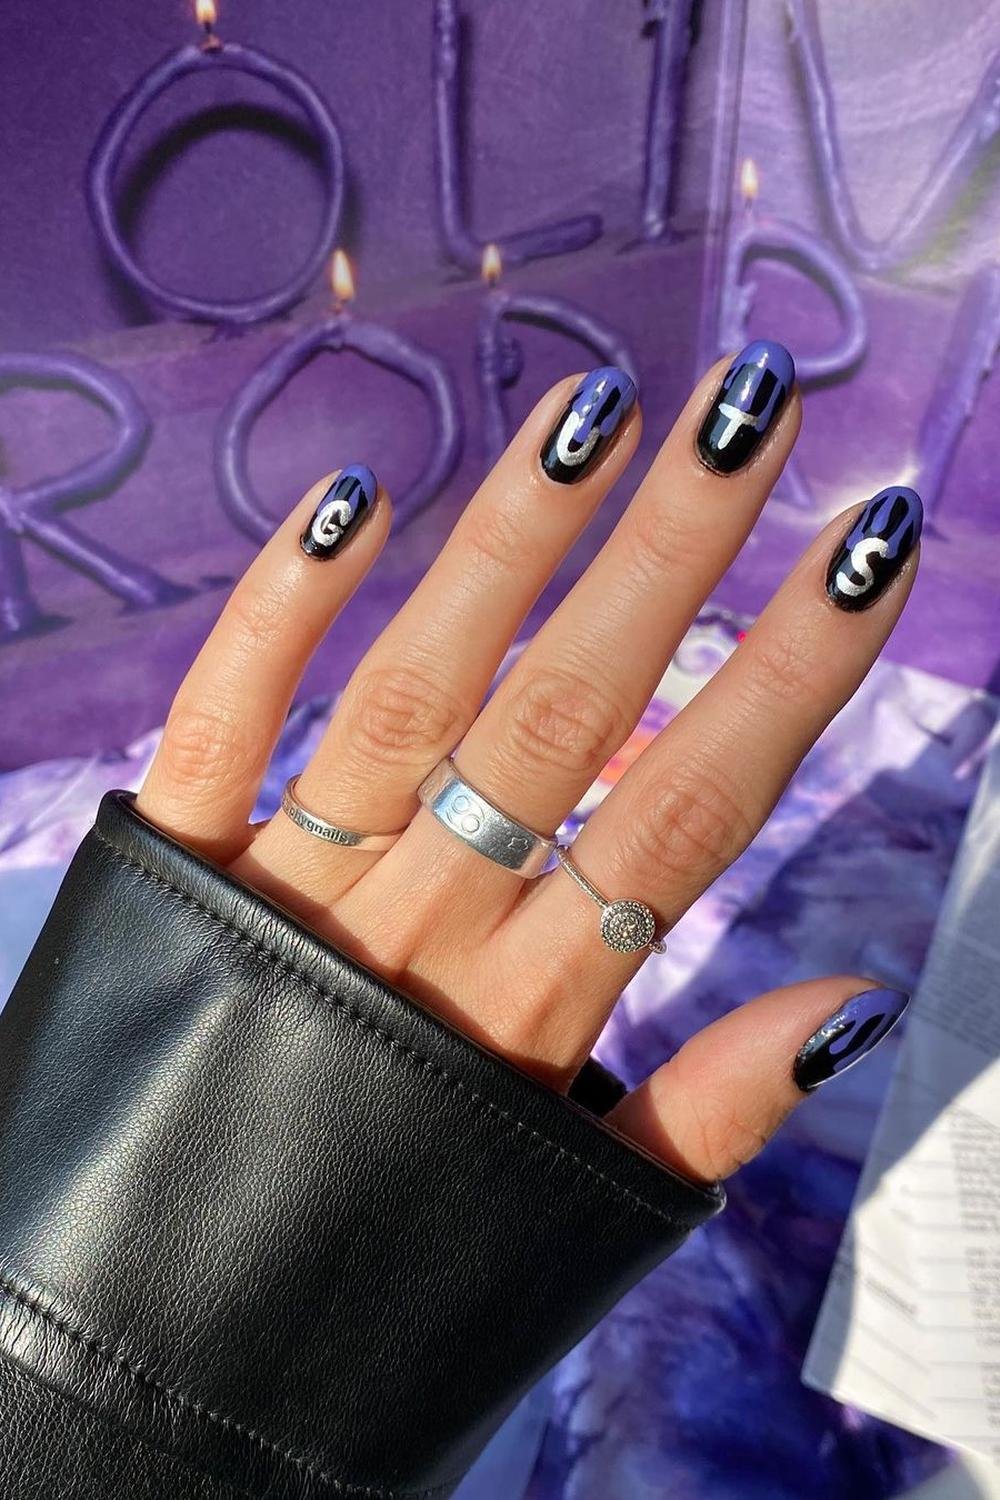 23 - Picture of Guts Tour Nails